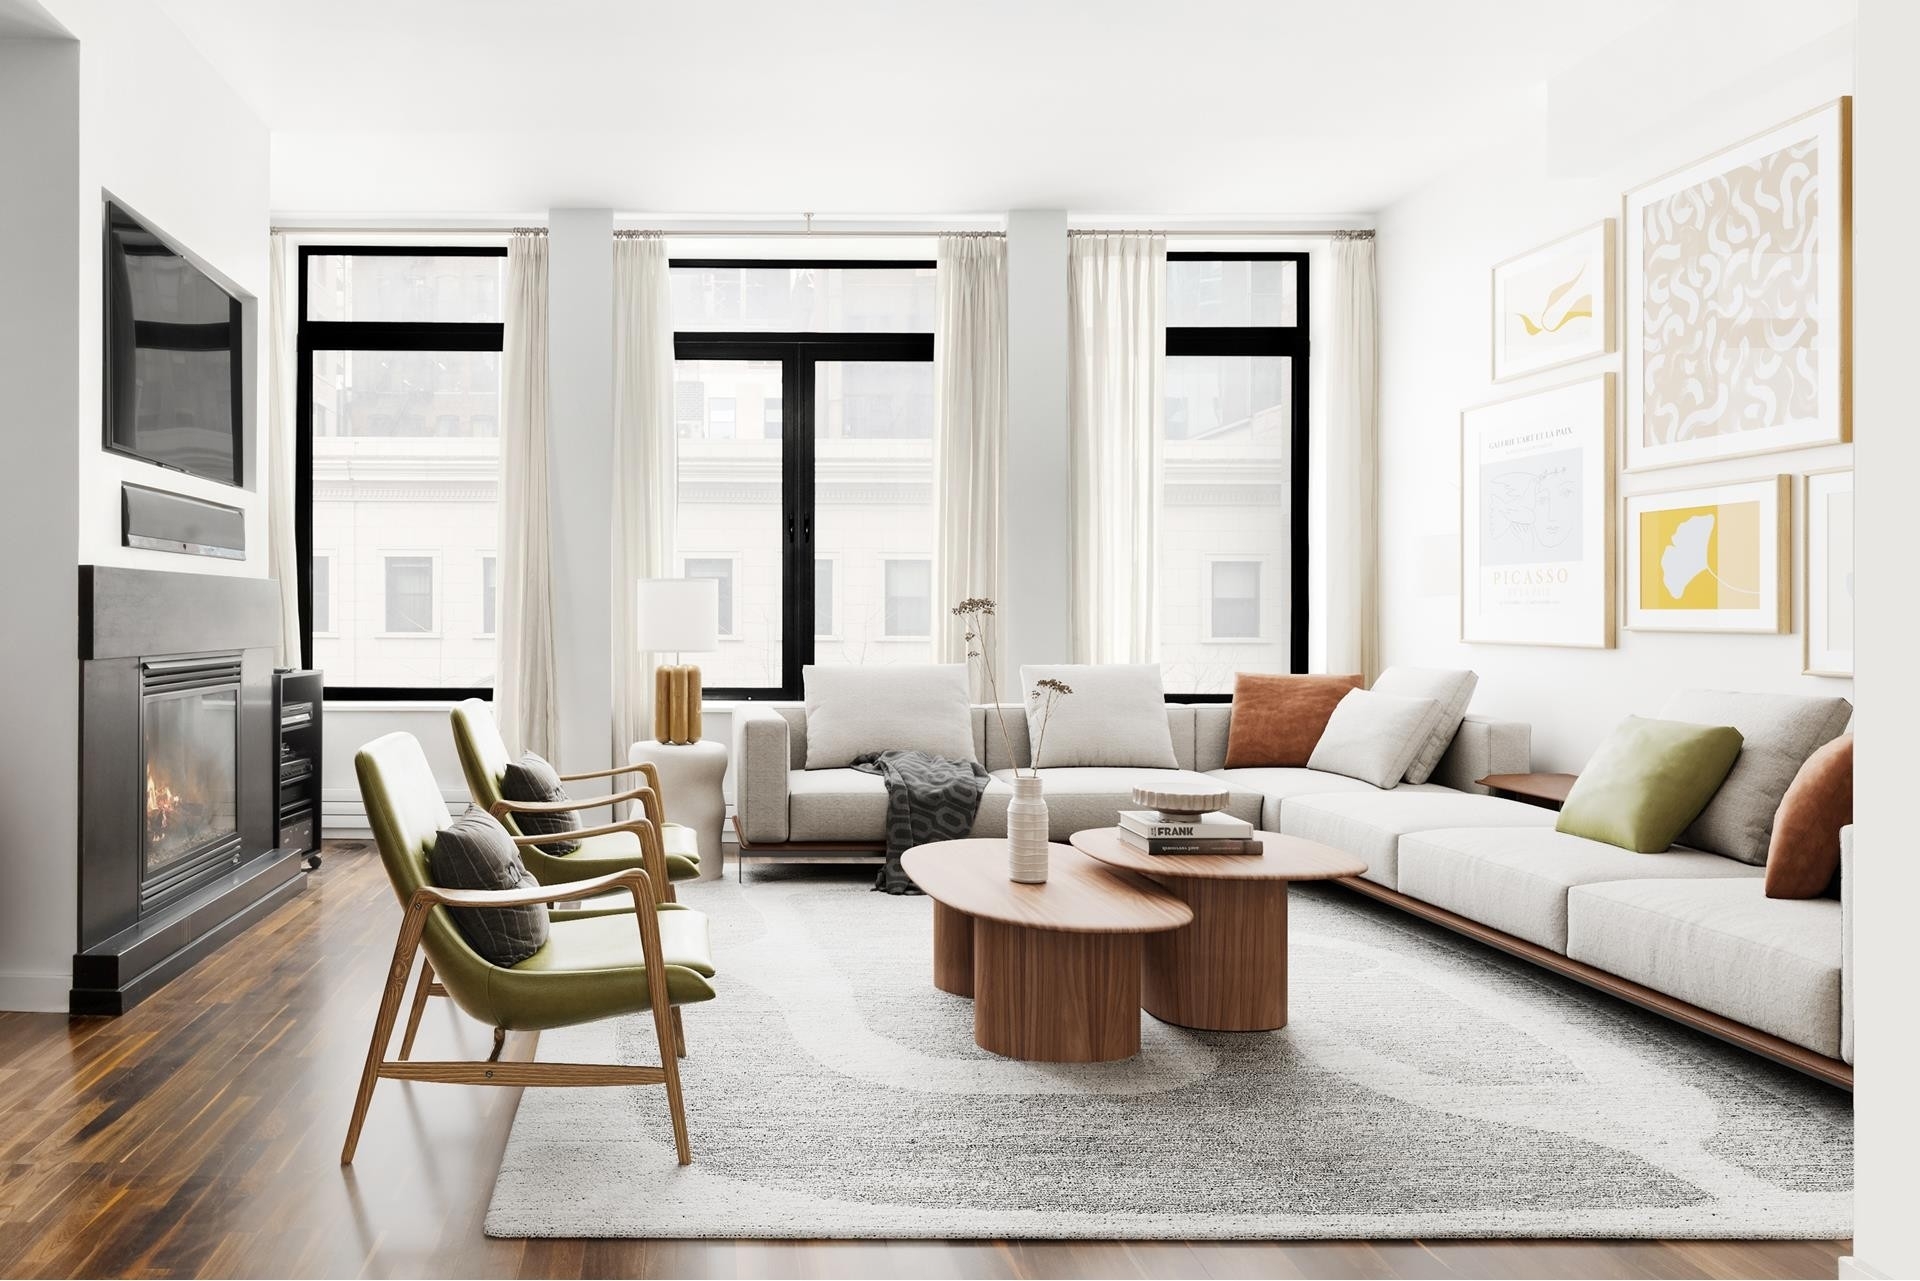 Condominium for Sale at The Story House, 36 E 22ND ST, 4A Flatiron District, New York, New York 10010